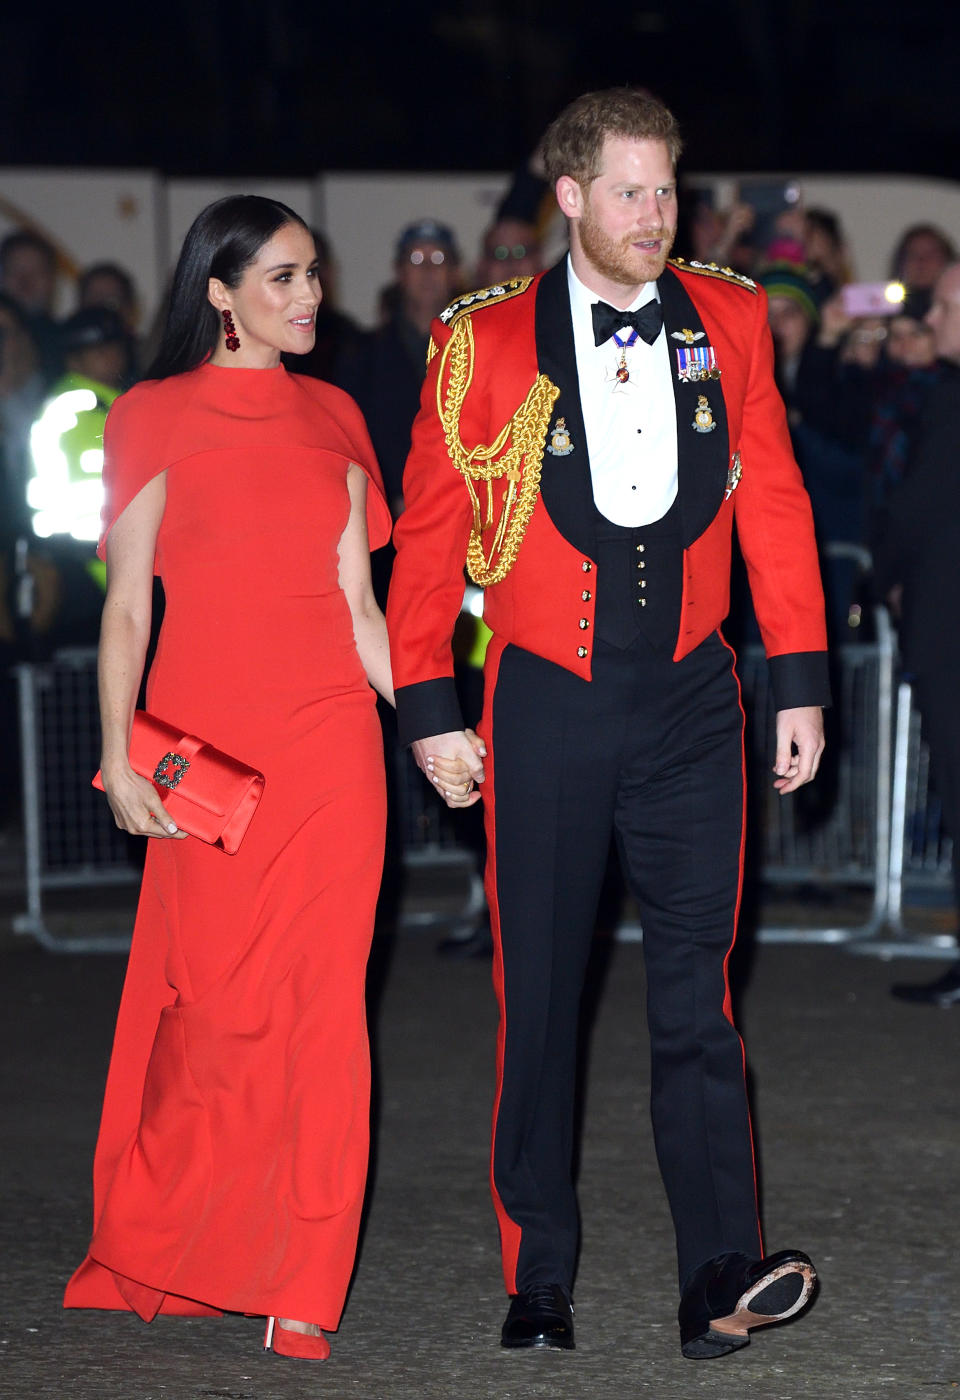 Prince Harry, Duke of Sussex and Meghan, Duchess of Sussex hold hands while arriving at the Mountbatten Festival of Music at Royal Albert Hall on March 07, 2020 in London, England